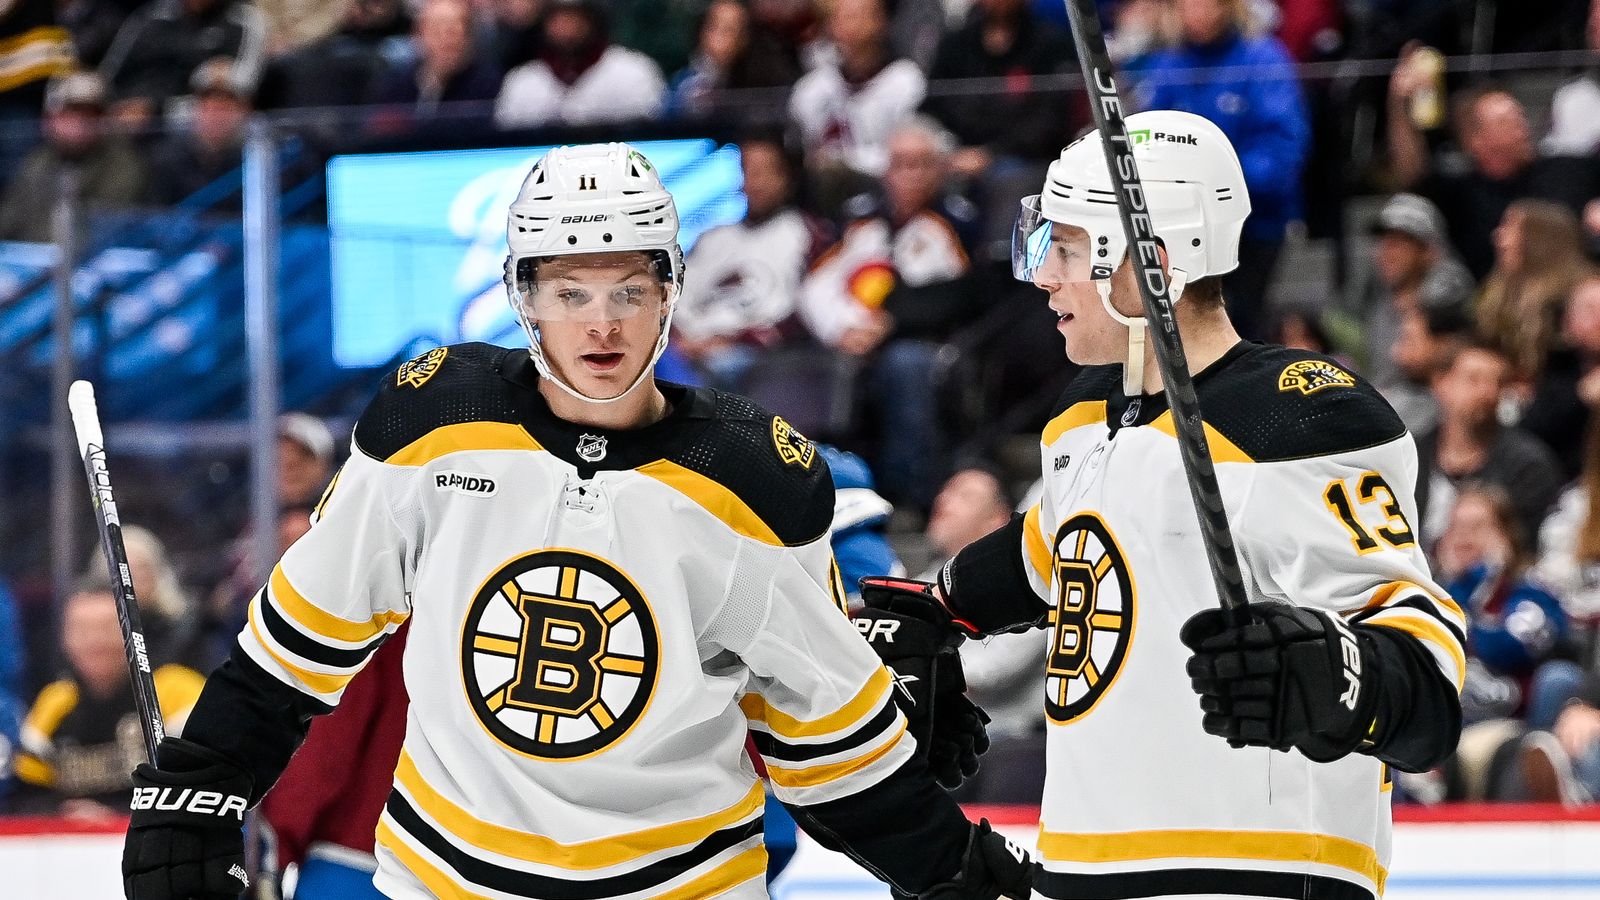 Boston Bruins 2021 main camp: How these x-factor players could